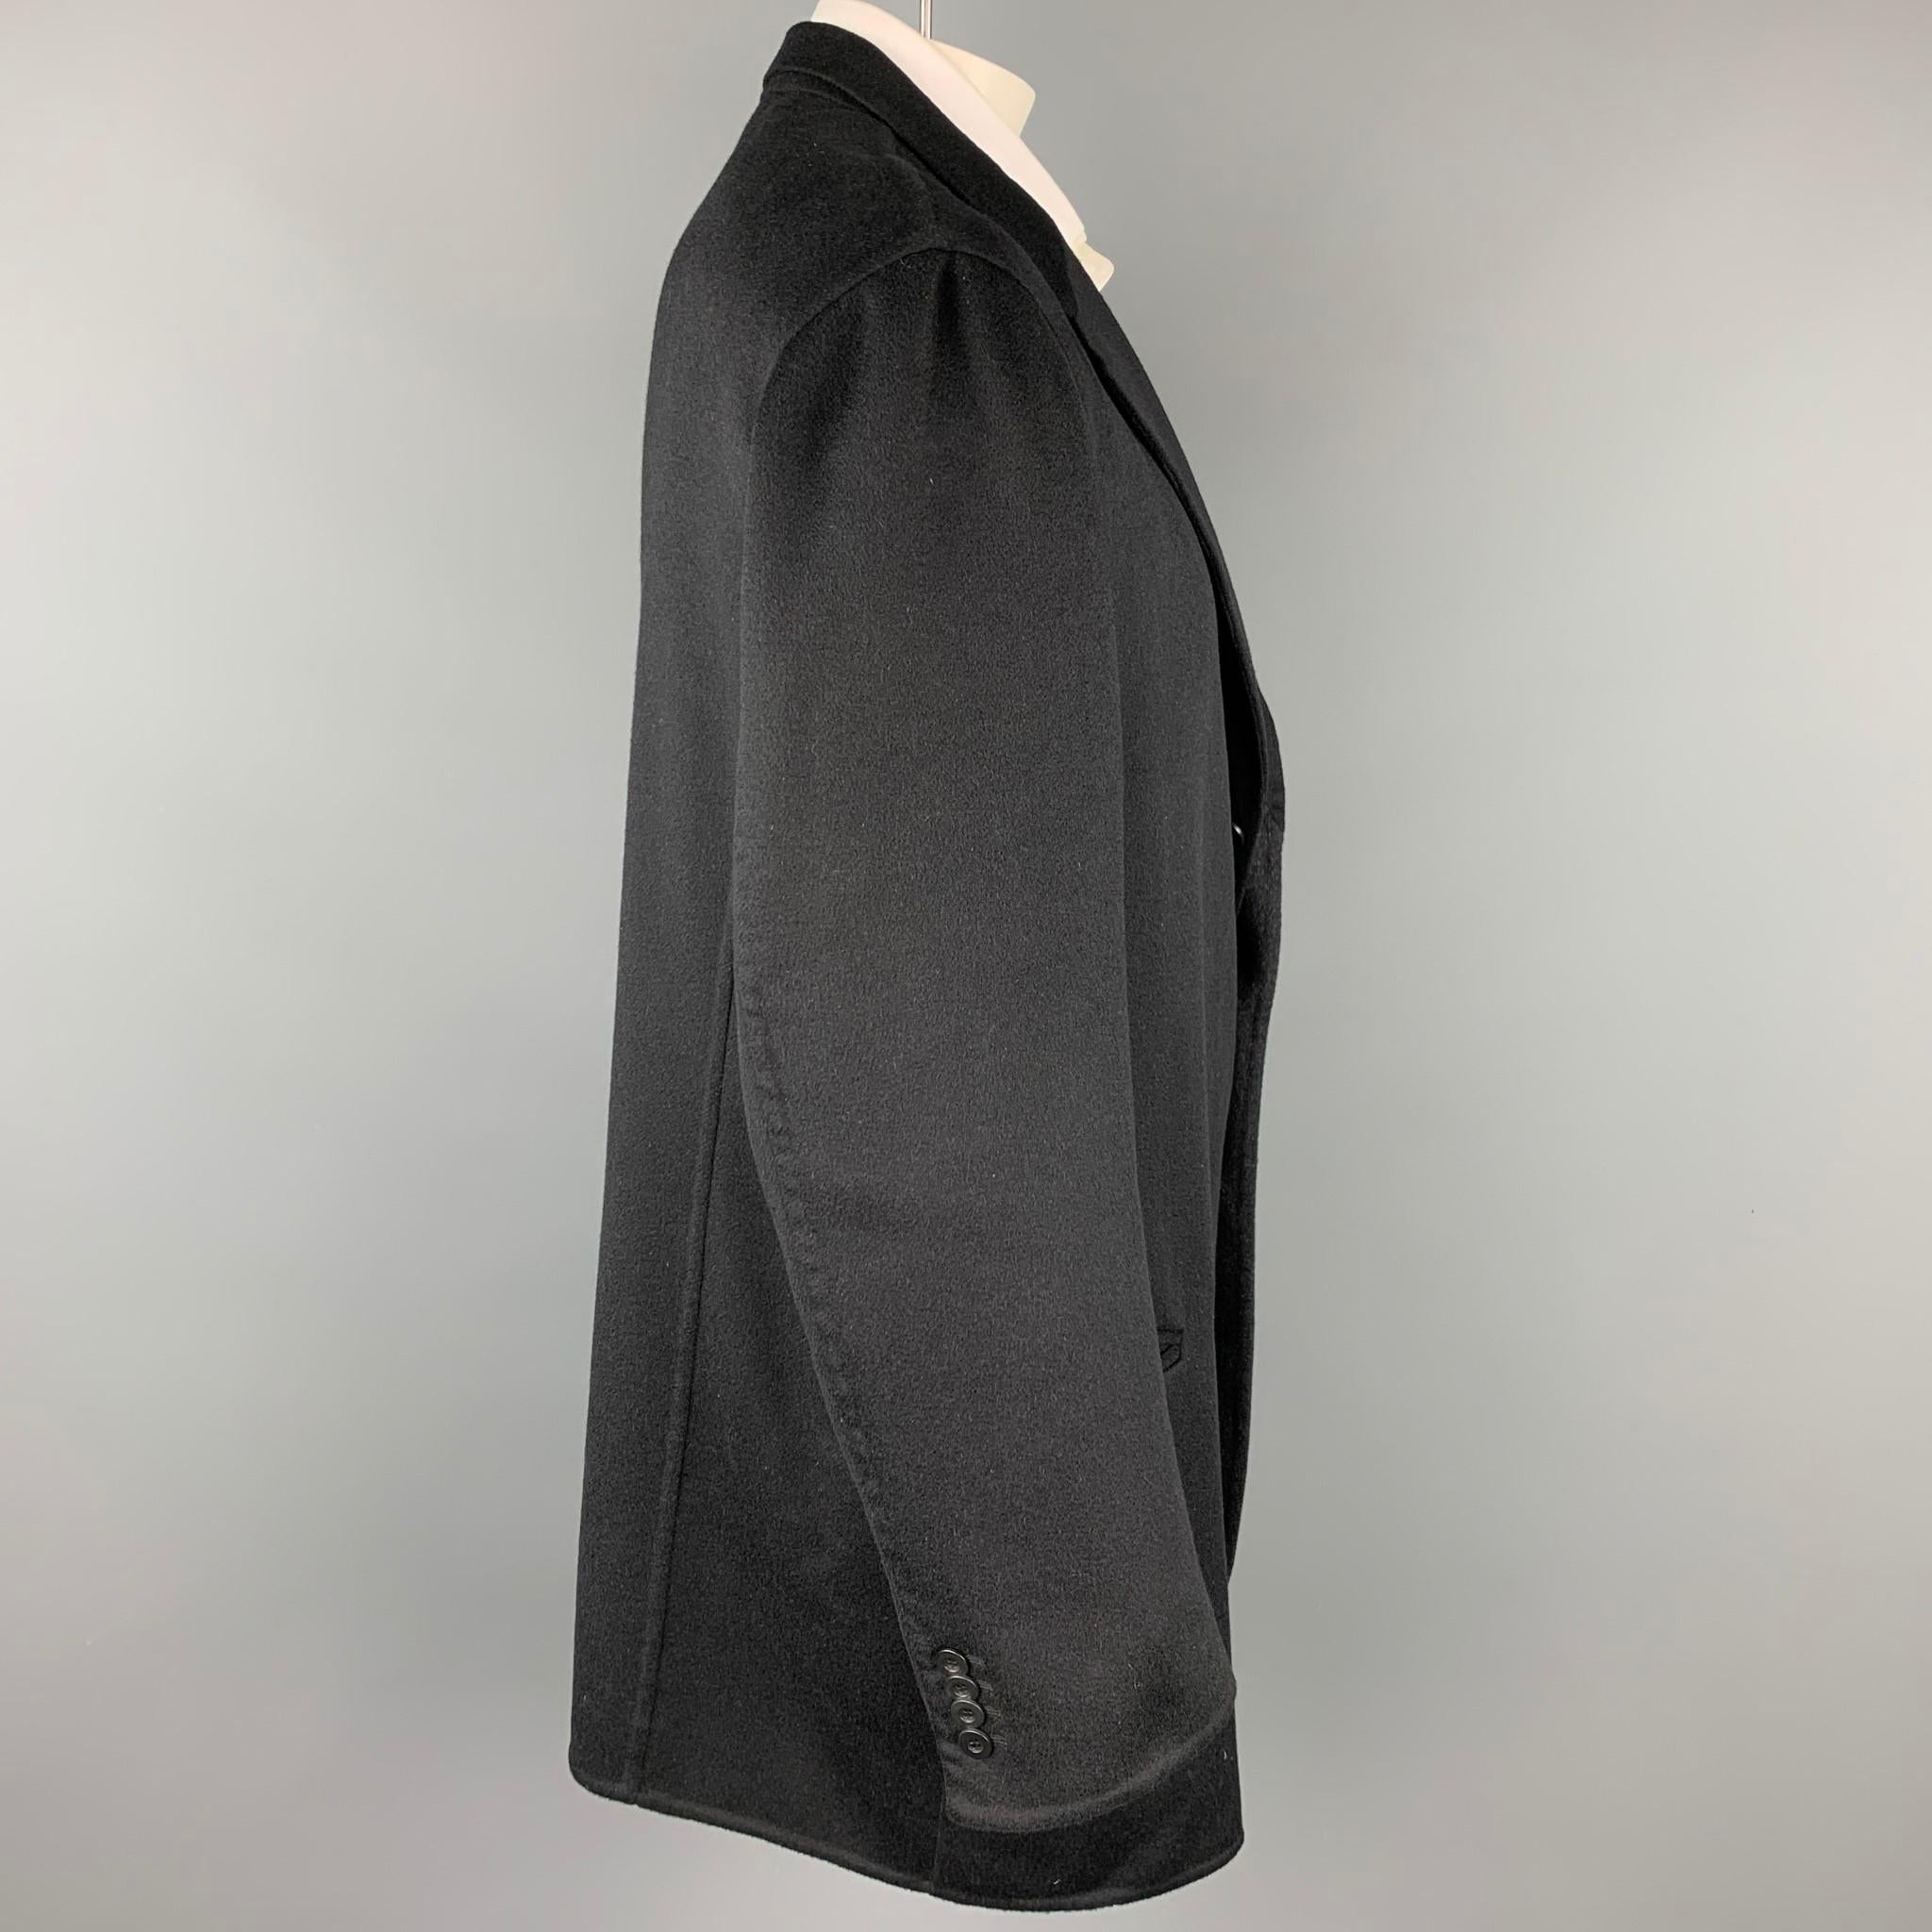 ARMANI COLLEZIONI sport coat comes in a black cashmere with a half liner featuring a notch lapel, slit pockets, and a three button closure. Made in Italy.

Very Good Pre-Owned Condition.
Marked: 50 L

Measurements:

Shoulder: 22 in.
Chest: 50